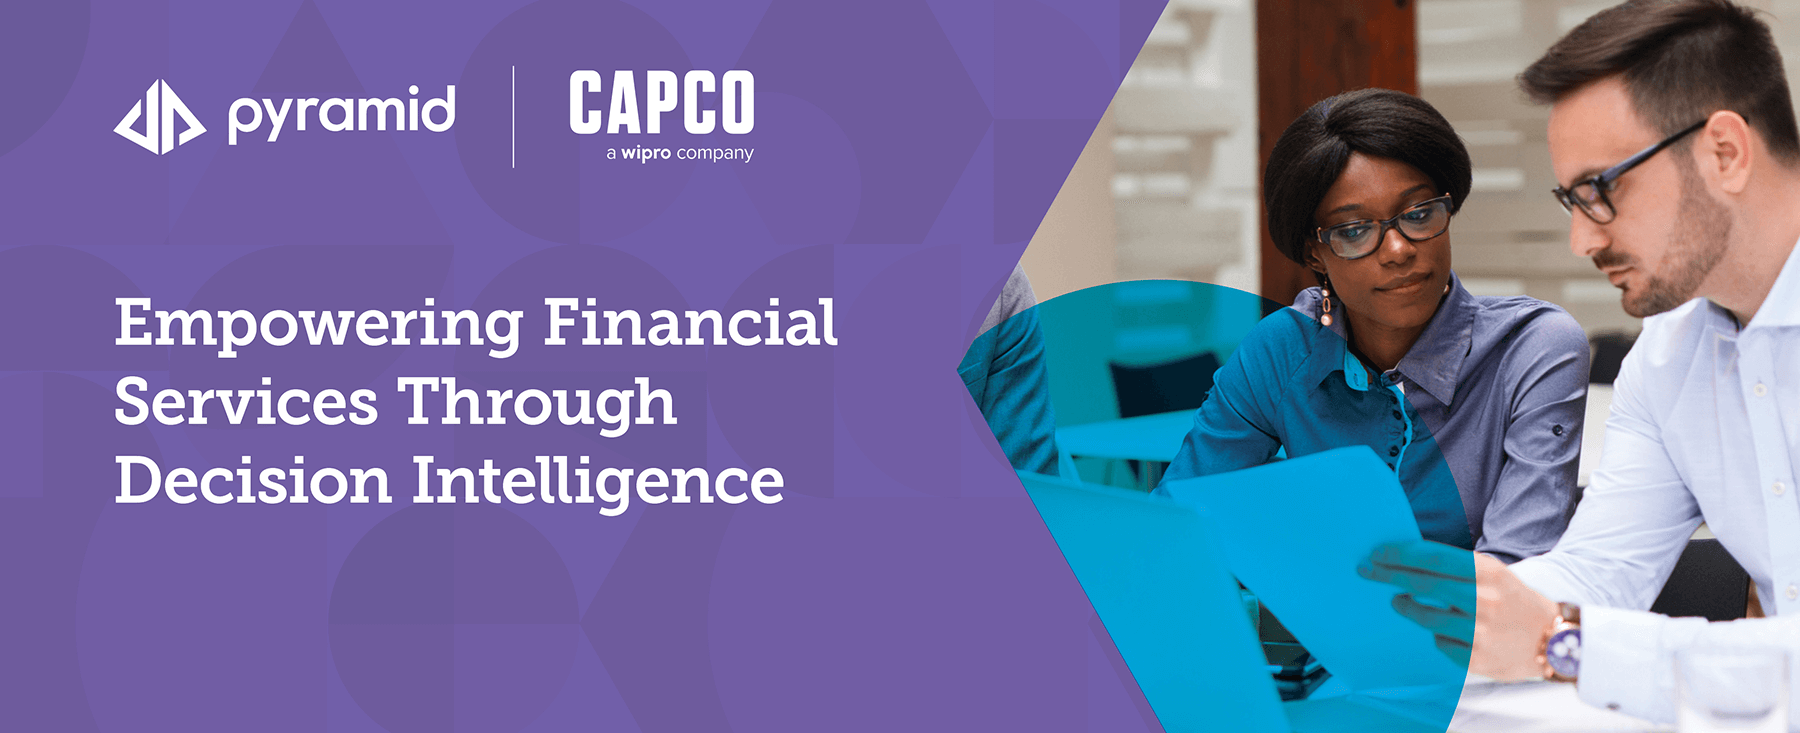 Explore how Decision Intelligence (DI) empowers financial services with data-driven decisions.